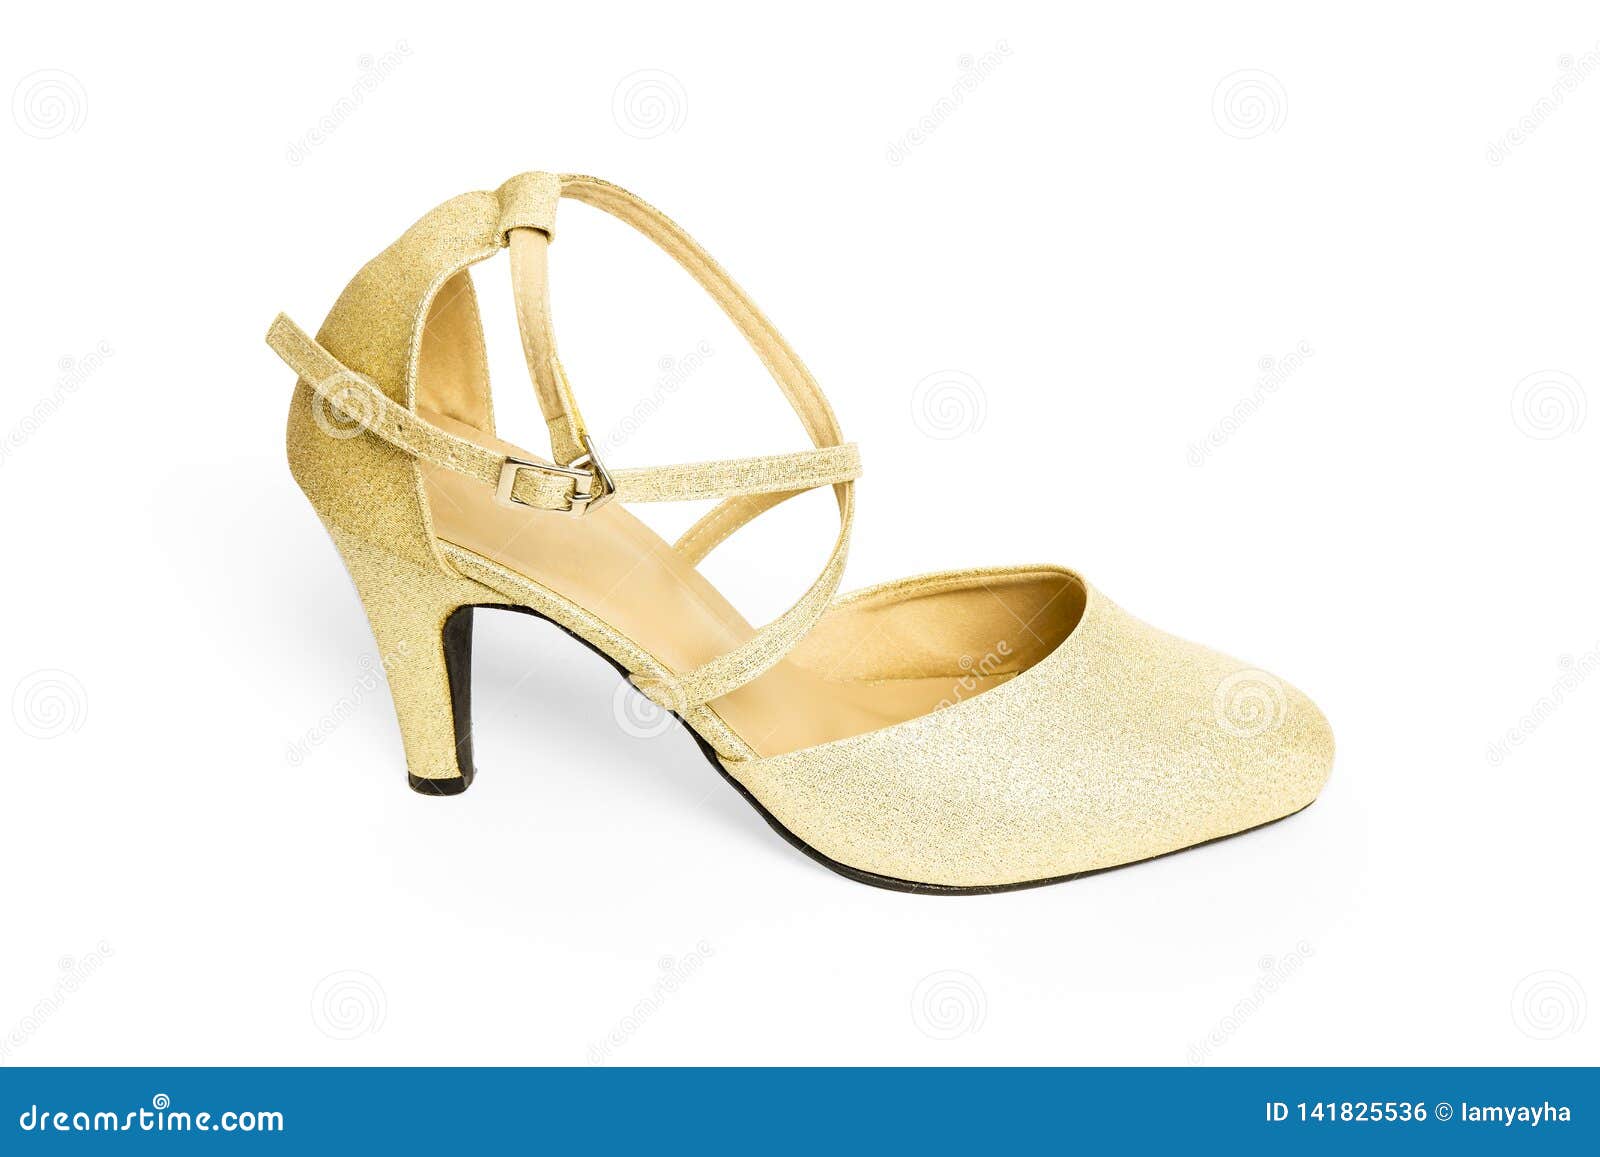 High/low: Gold high heels | Canadian Living